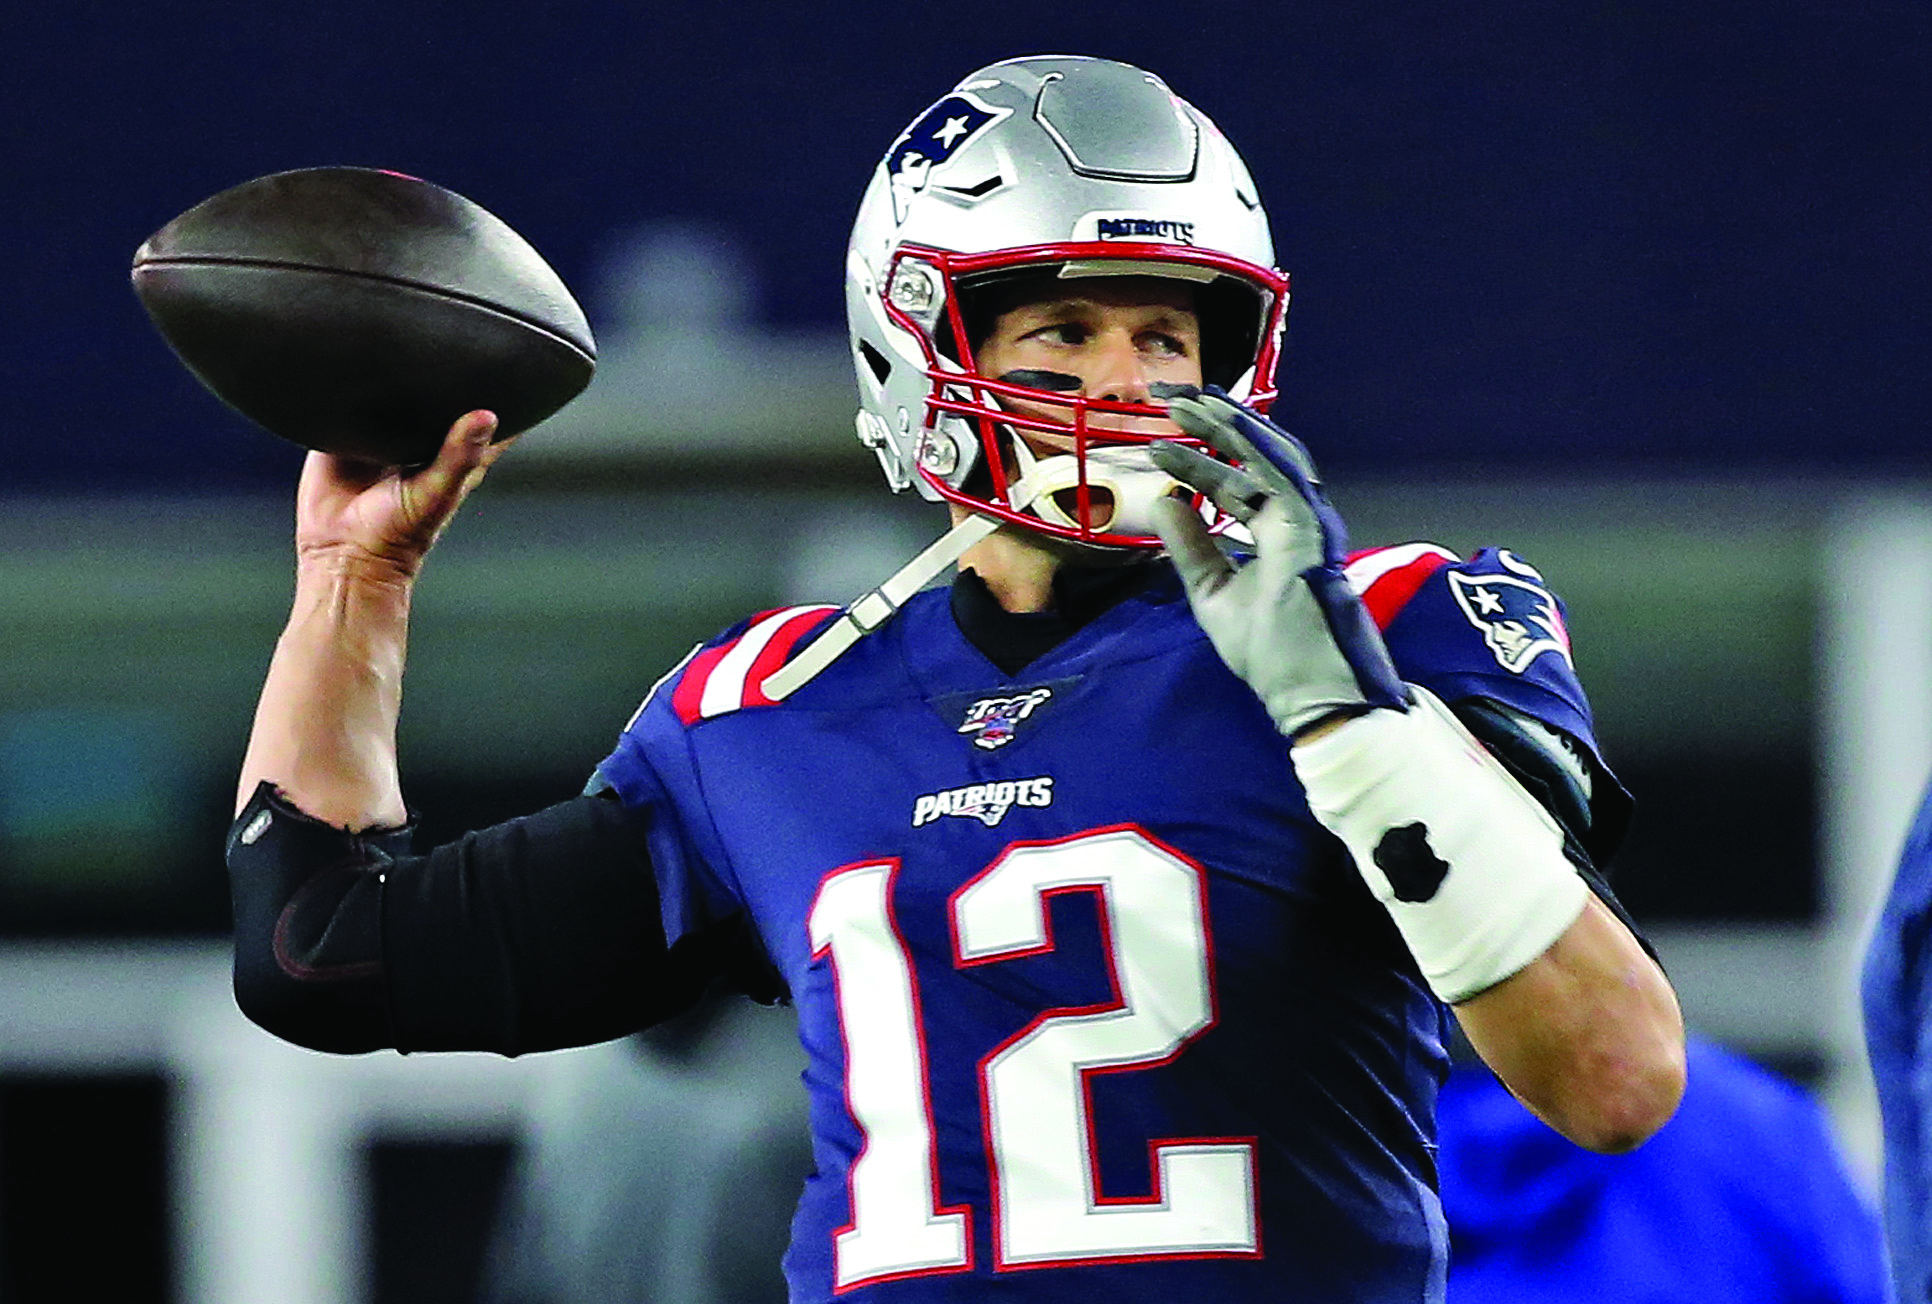 Tom Brady is playing as well or better now at age 42 than he did